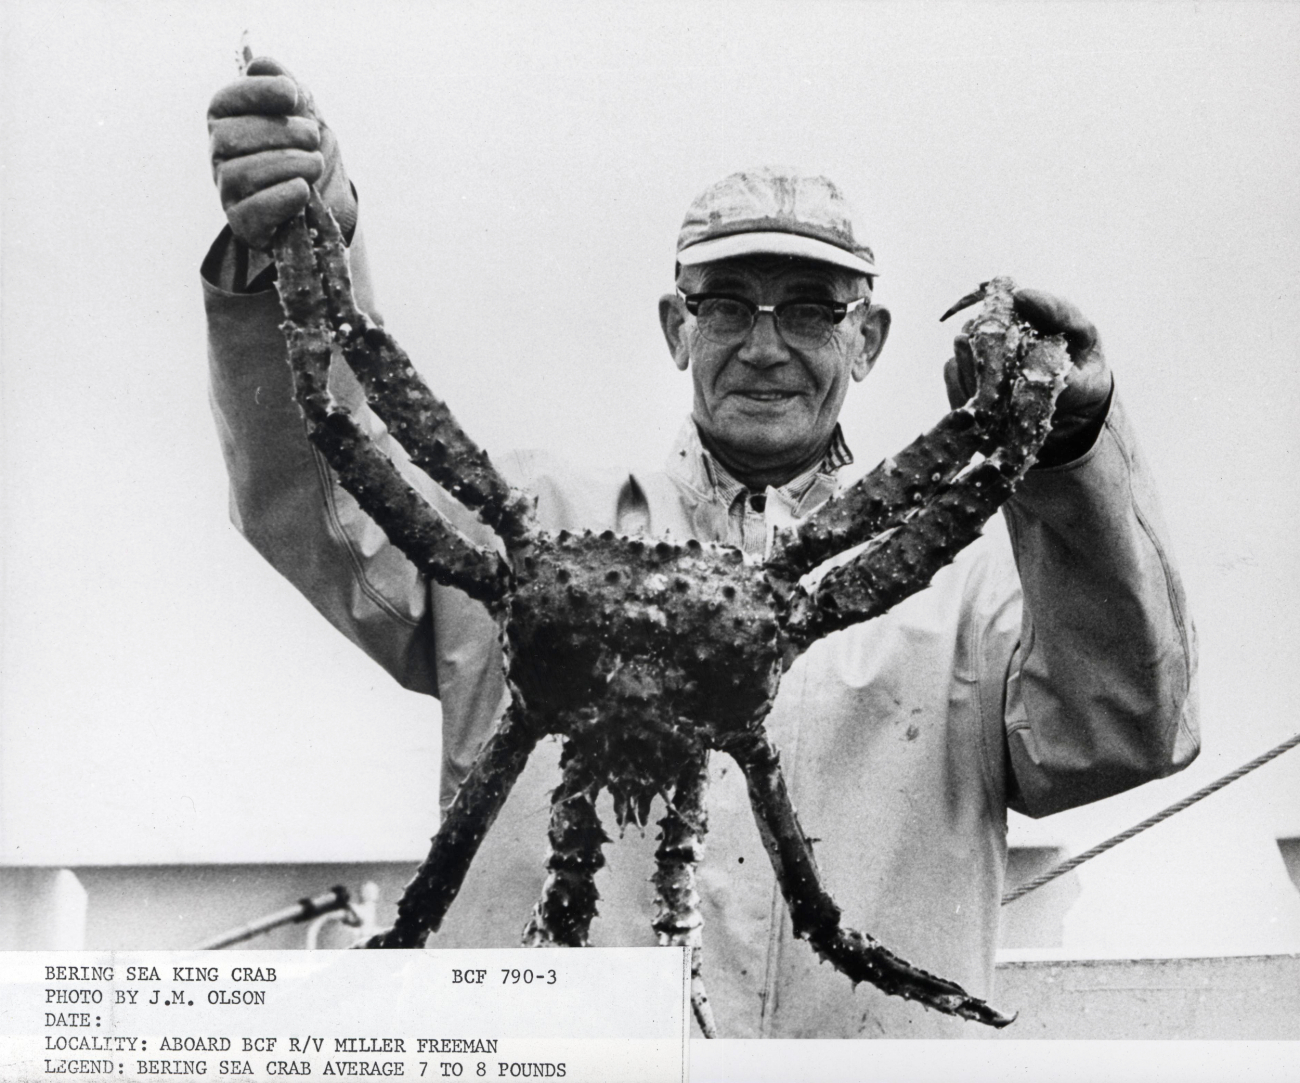 Bering Sea king crab caught by the BCF research vessel MILLER FREEMAN